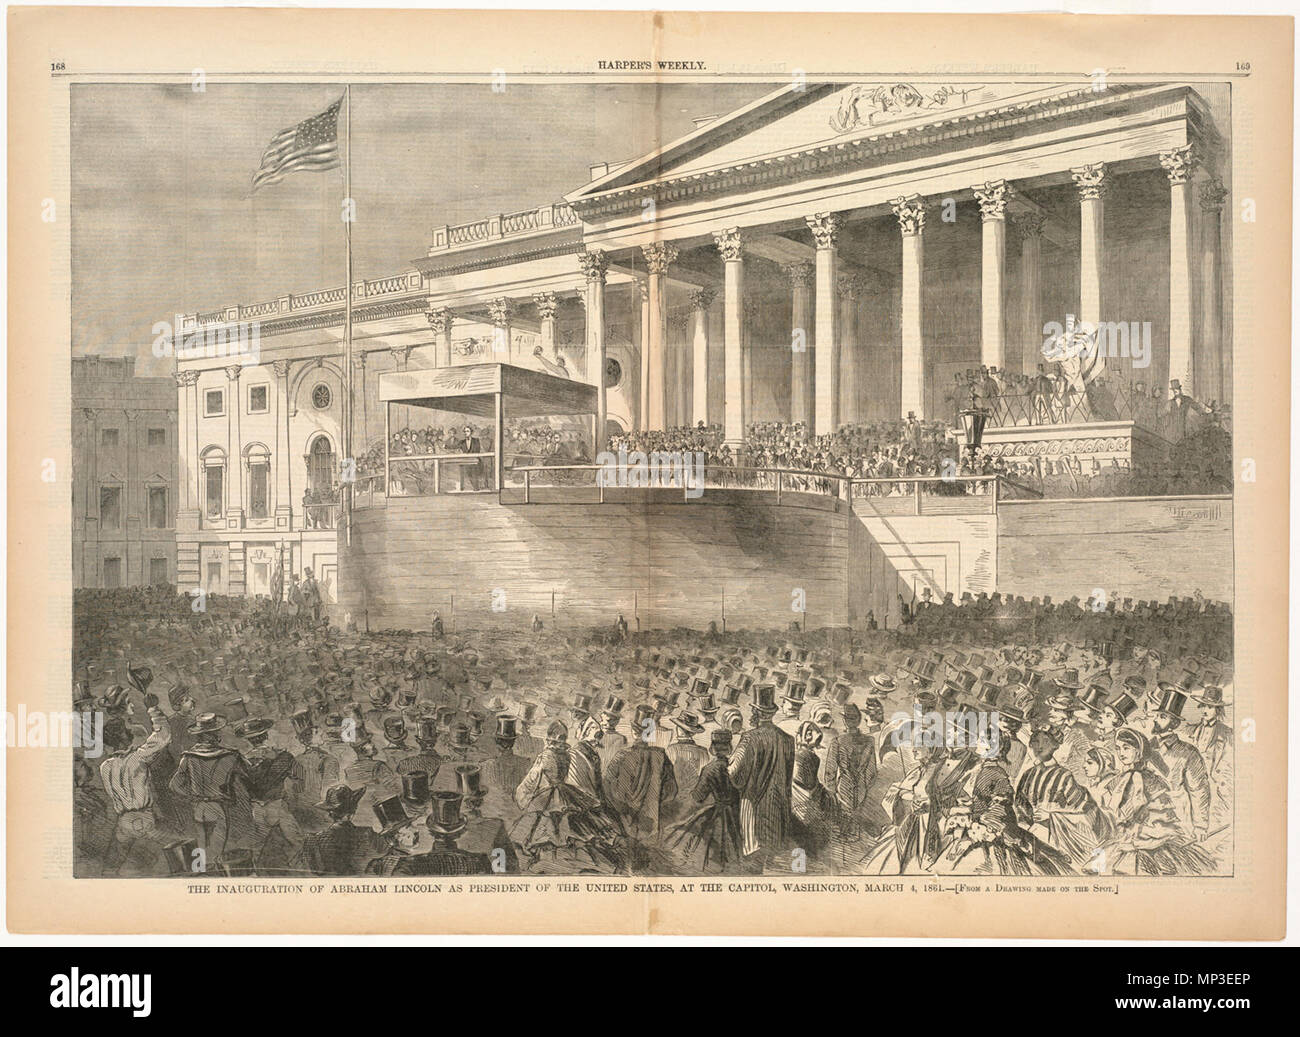 . English:   File name: 10 09 000041 Title: The Inauguration of Abraham Lincoln as President of the United States, at the Capitol, Washington, March 4, 1861 Creator/Contributor: Homer, Winslow, 1836-1910 (artist) Date issued: 1861-03-16 Physical description: 1 print : wood engraving Genre: Wood engravings; Periodical illustrations Notes: Published in: Harper's Weekly, Volume V, 16 March 1861, pp. 168-169.; From a drawing made on the spot. Collection: Winslow Homer Collection Location: Boston Public Library, Print Department Rights: No known restrictions Flickr data on 2011-08-11: Camera: Sinar Stock Photo